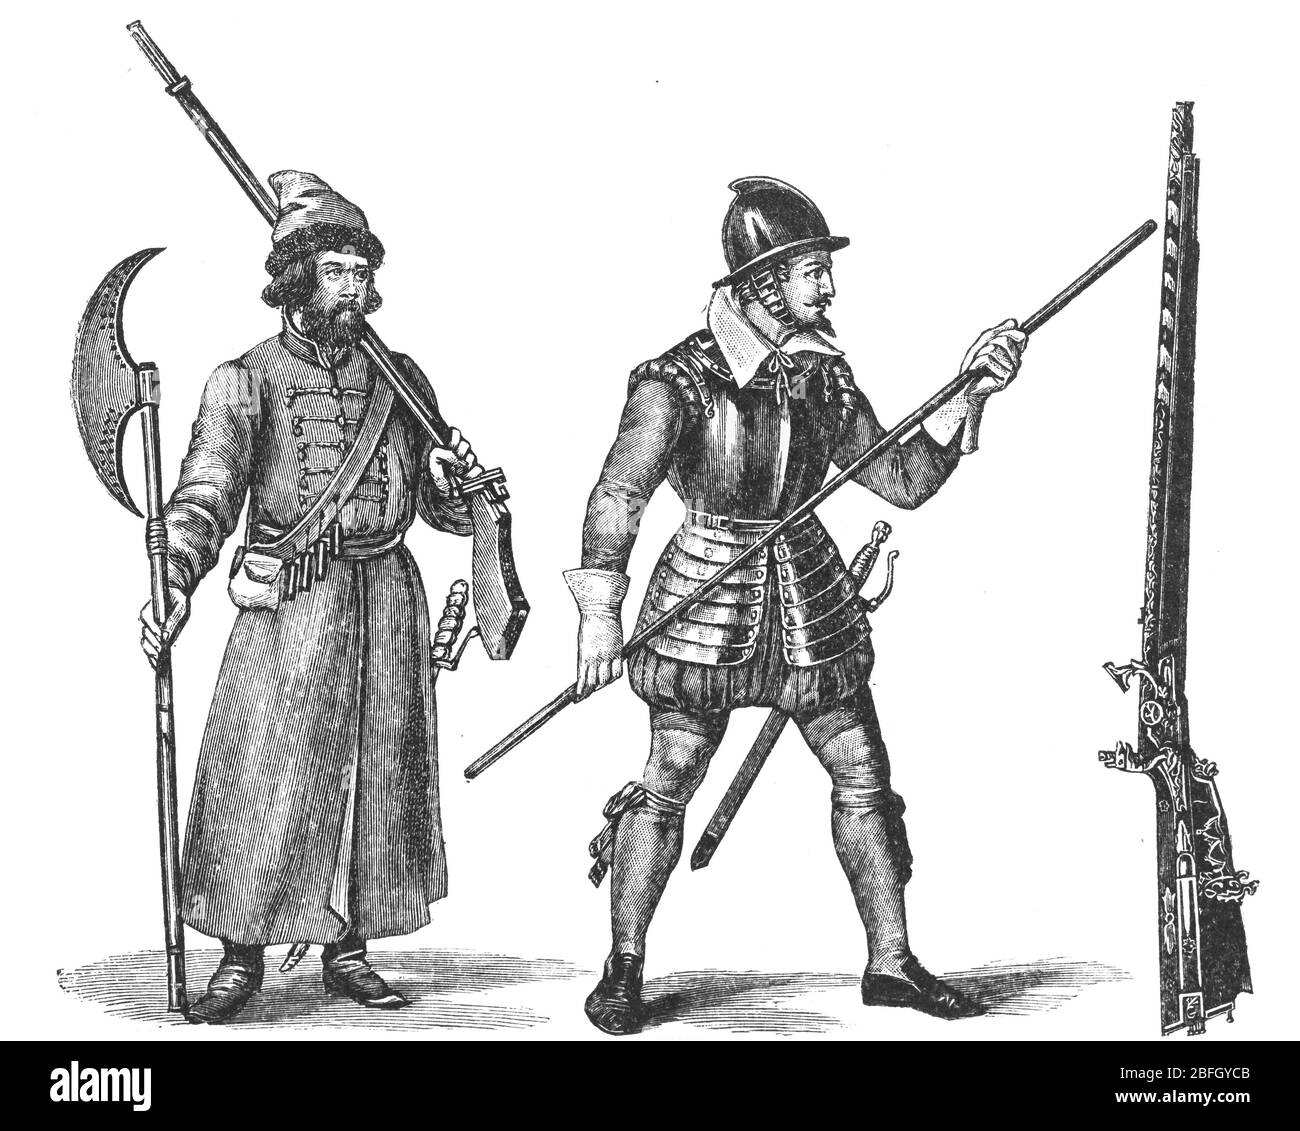 Russian army, 17th century, illustration from book dated 1916 Stock Photo